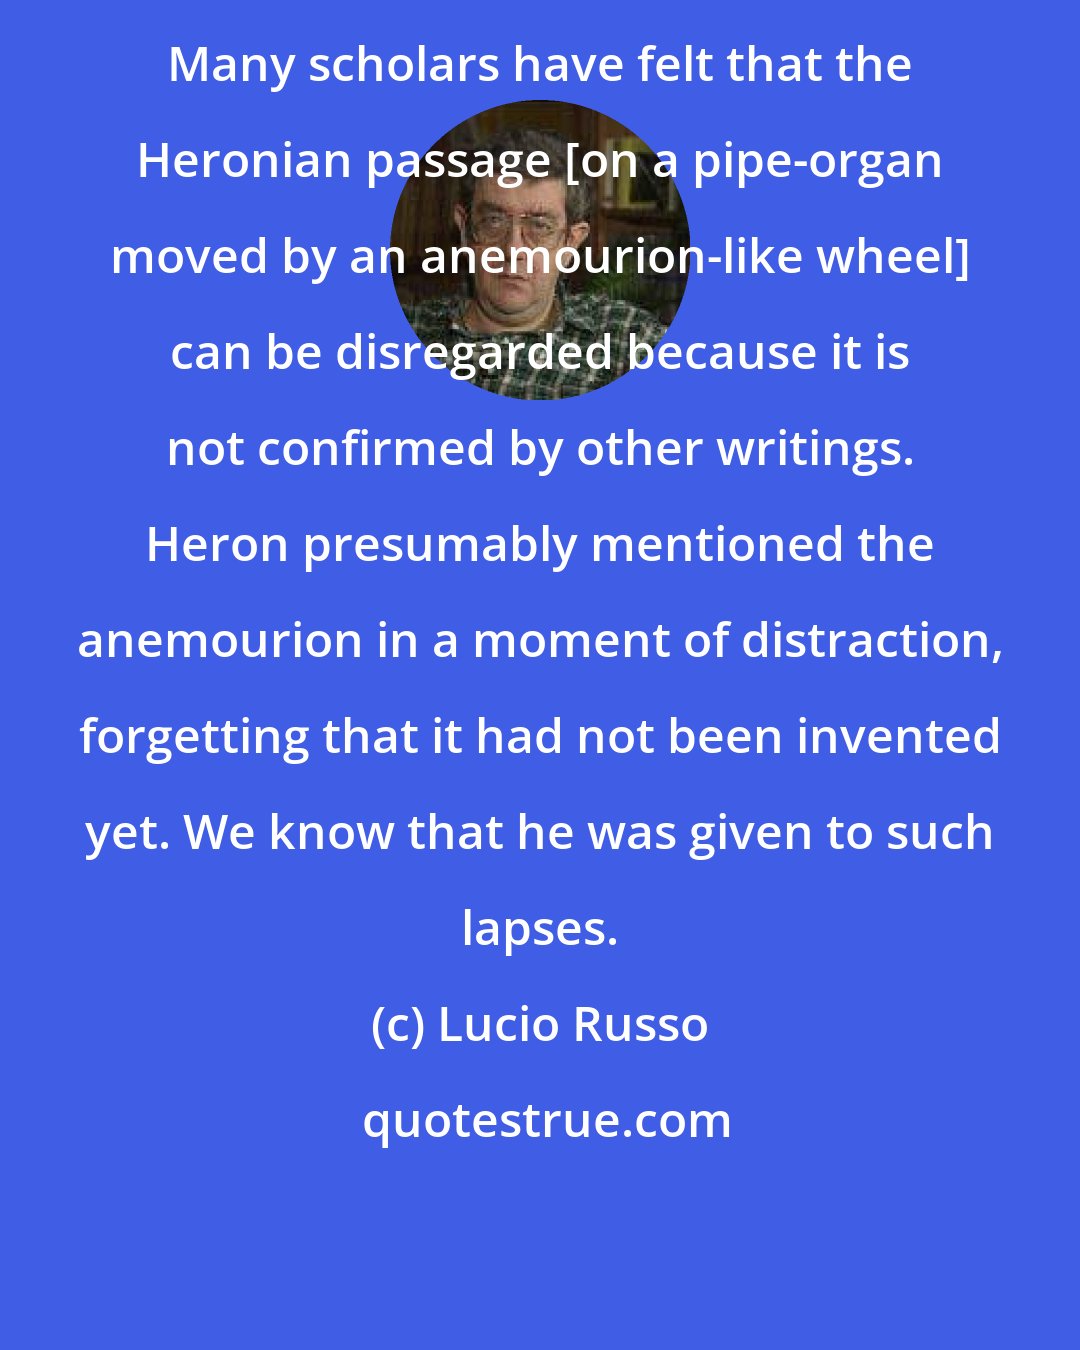 Lucio Russo: Many scholars have felt that the Heronian passage [on a pipe-organ moved by an anemourion-like wheel] can be disregarded because it is not confirmed by other writings. Heron presumably mentioned the anemourion in a moment of distraction, forgetting that it had not been invented yet. We know that he was given to such lapses.